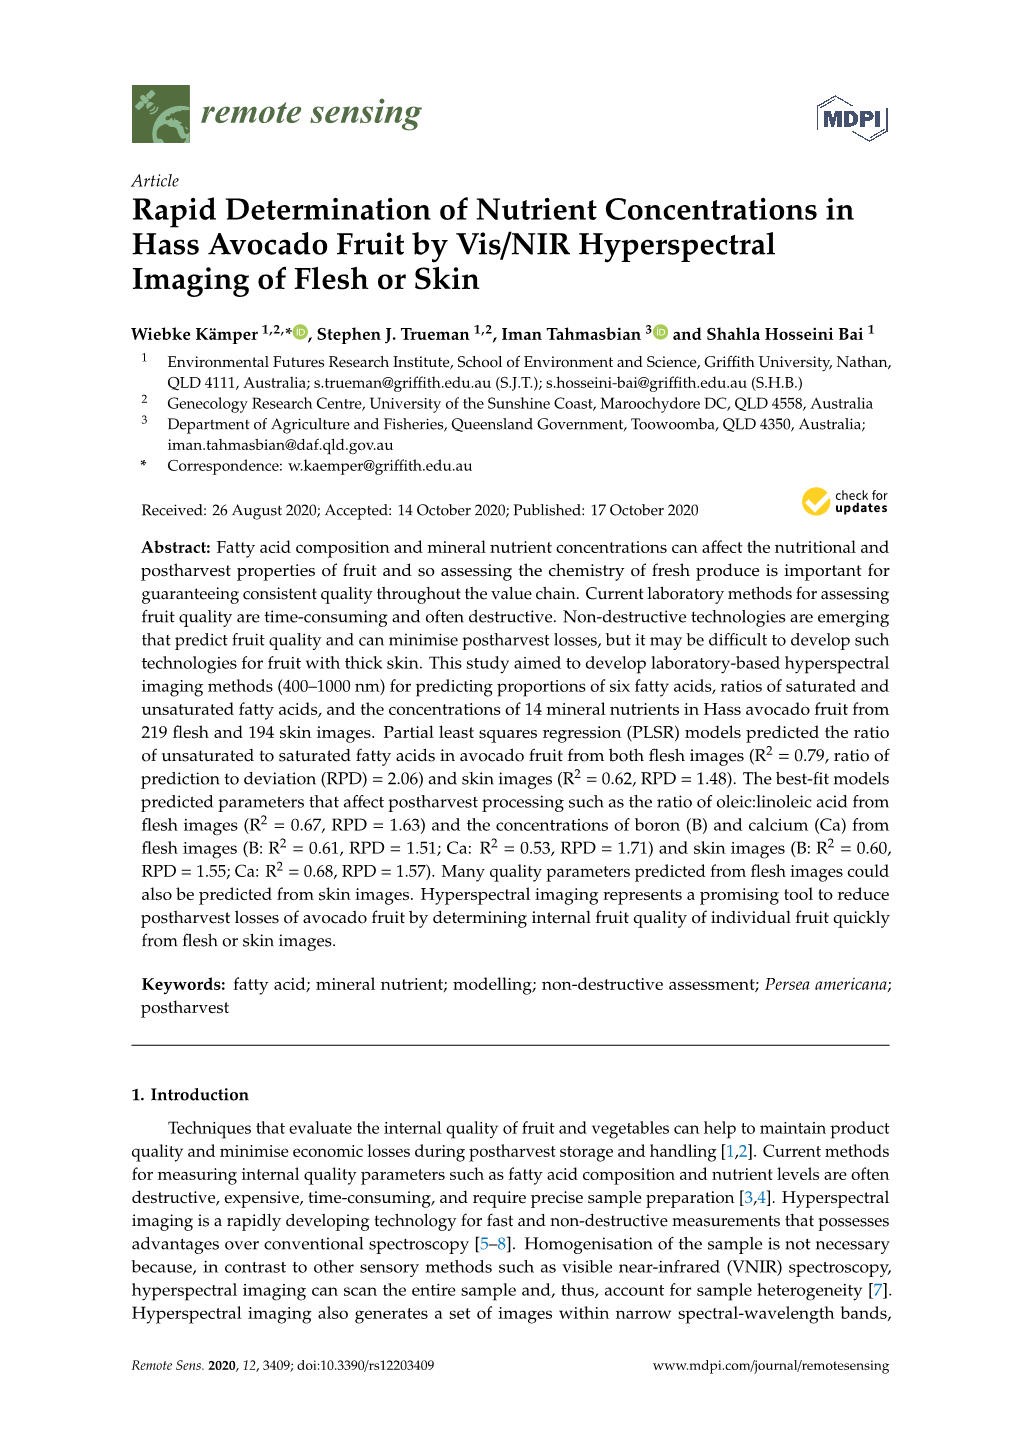 Rapid Determination of Nutrient Concentrations in Hass Avocado Fruit by Vis/NIR Hyperspectral Imaging of Flesh Or Skin